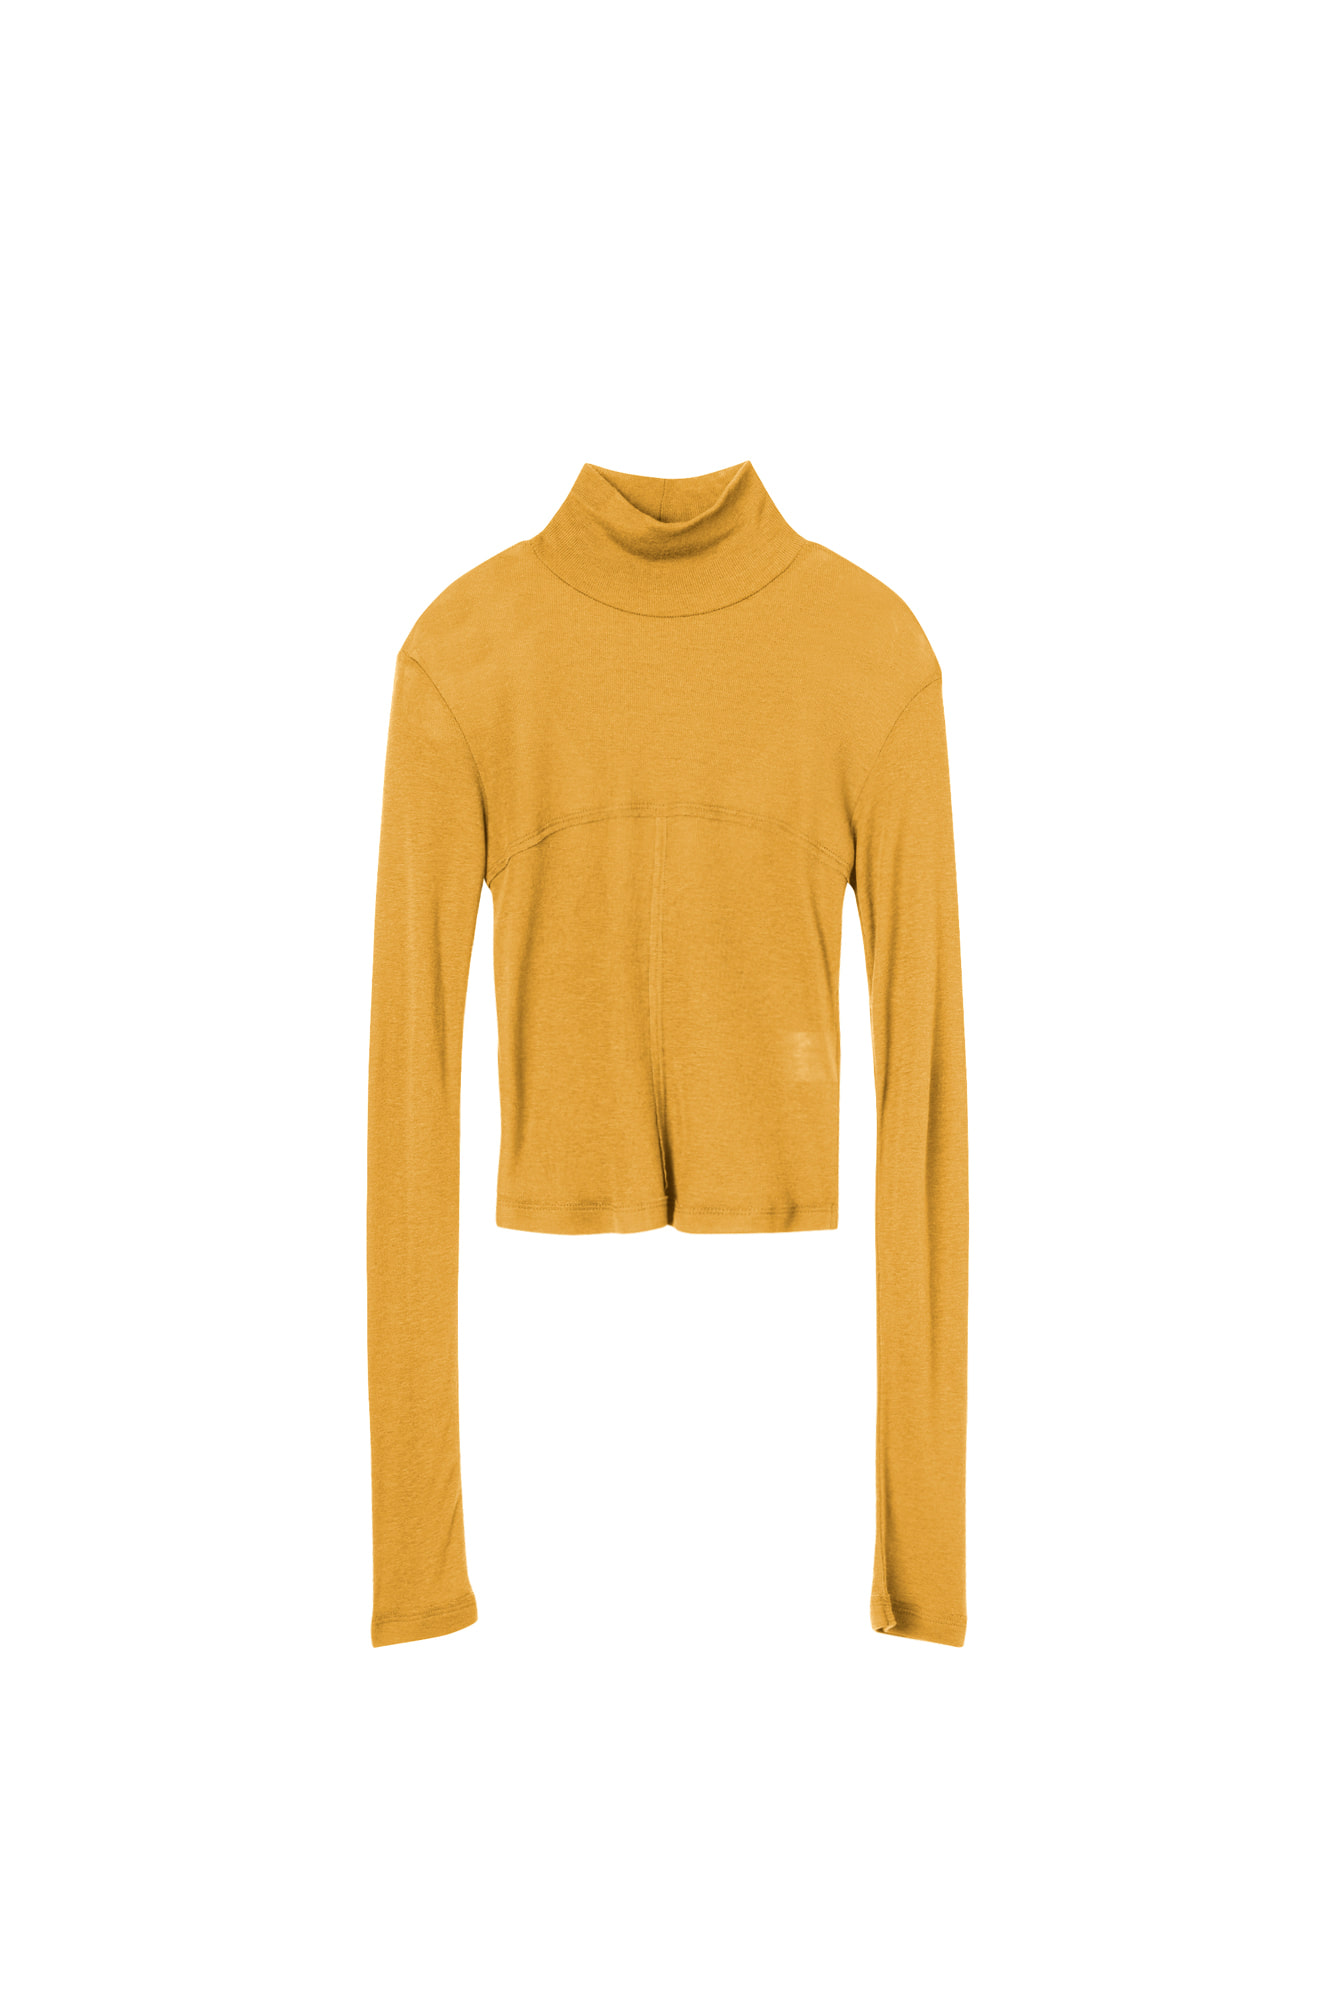 MONA TURTLE CROPPED TOP_MUSTARD, LAVENDER